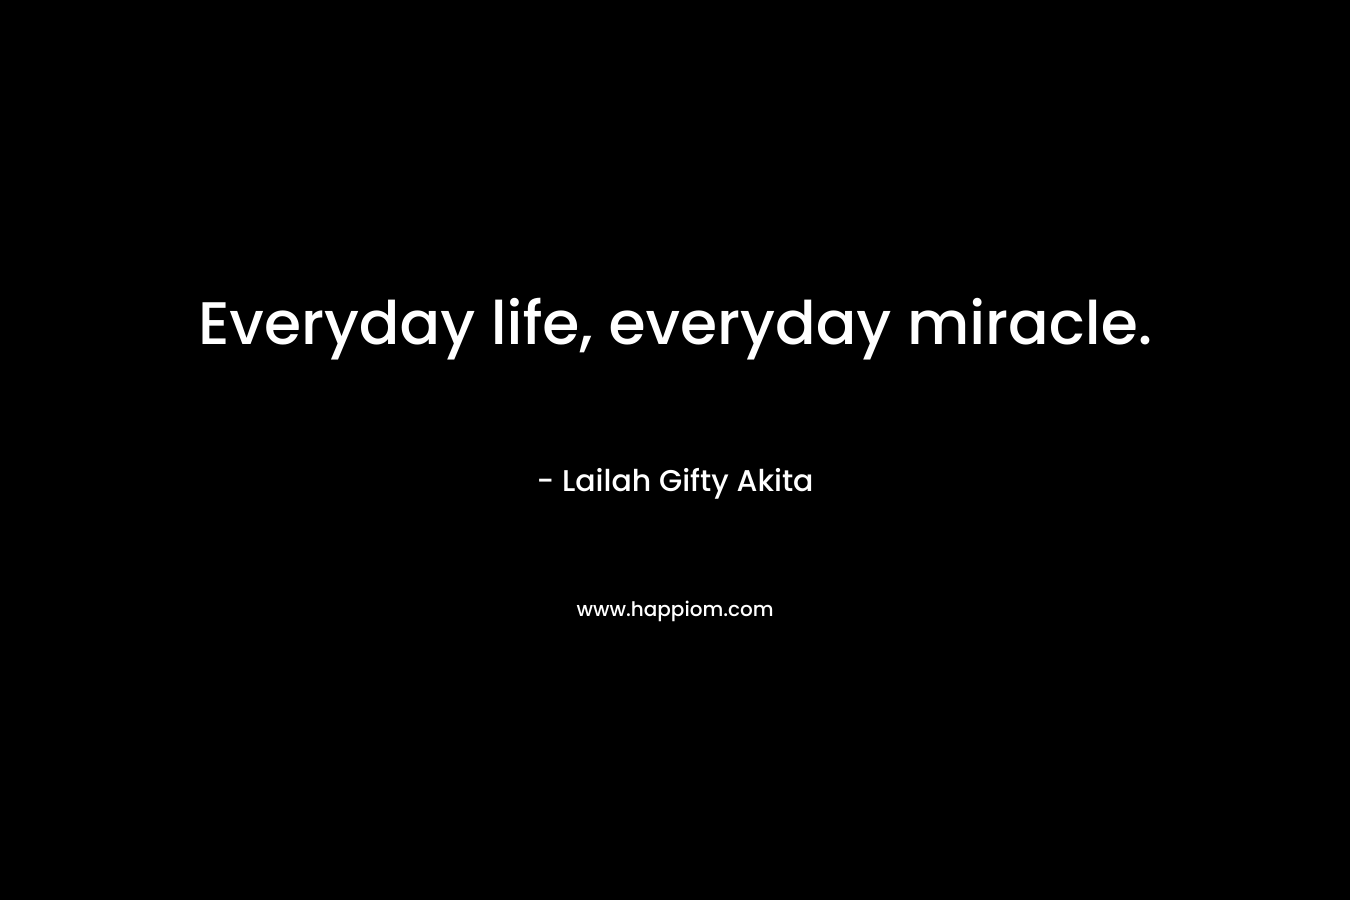 Everyday life, everyday miracle.